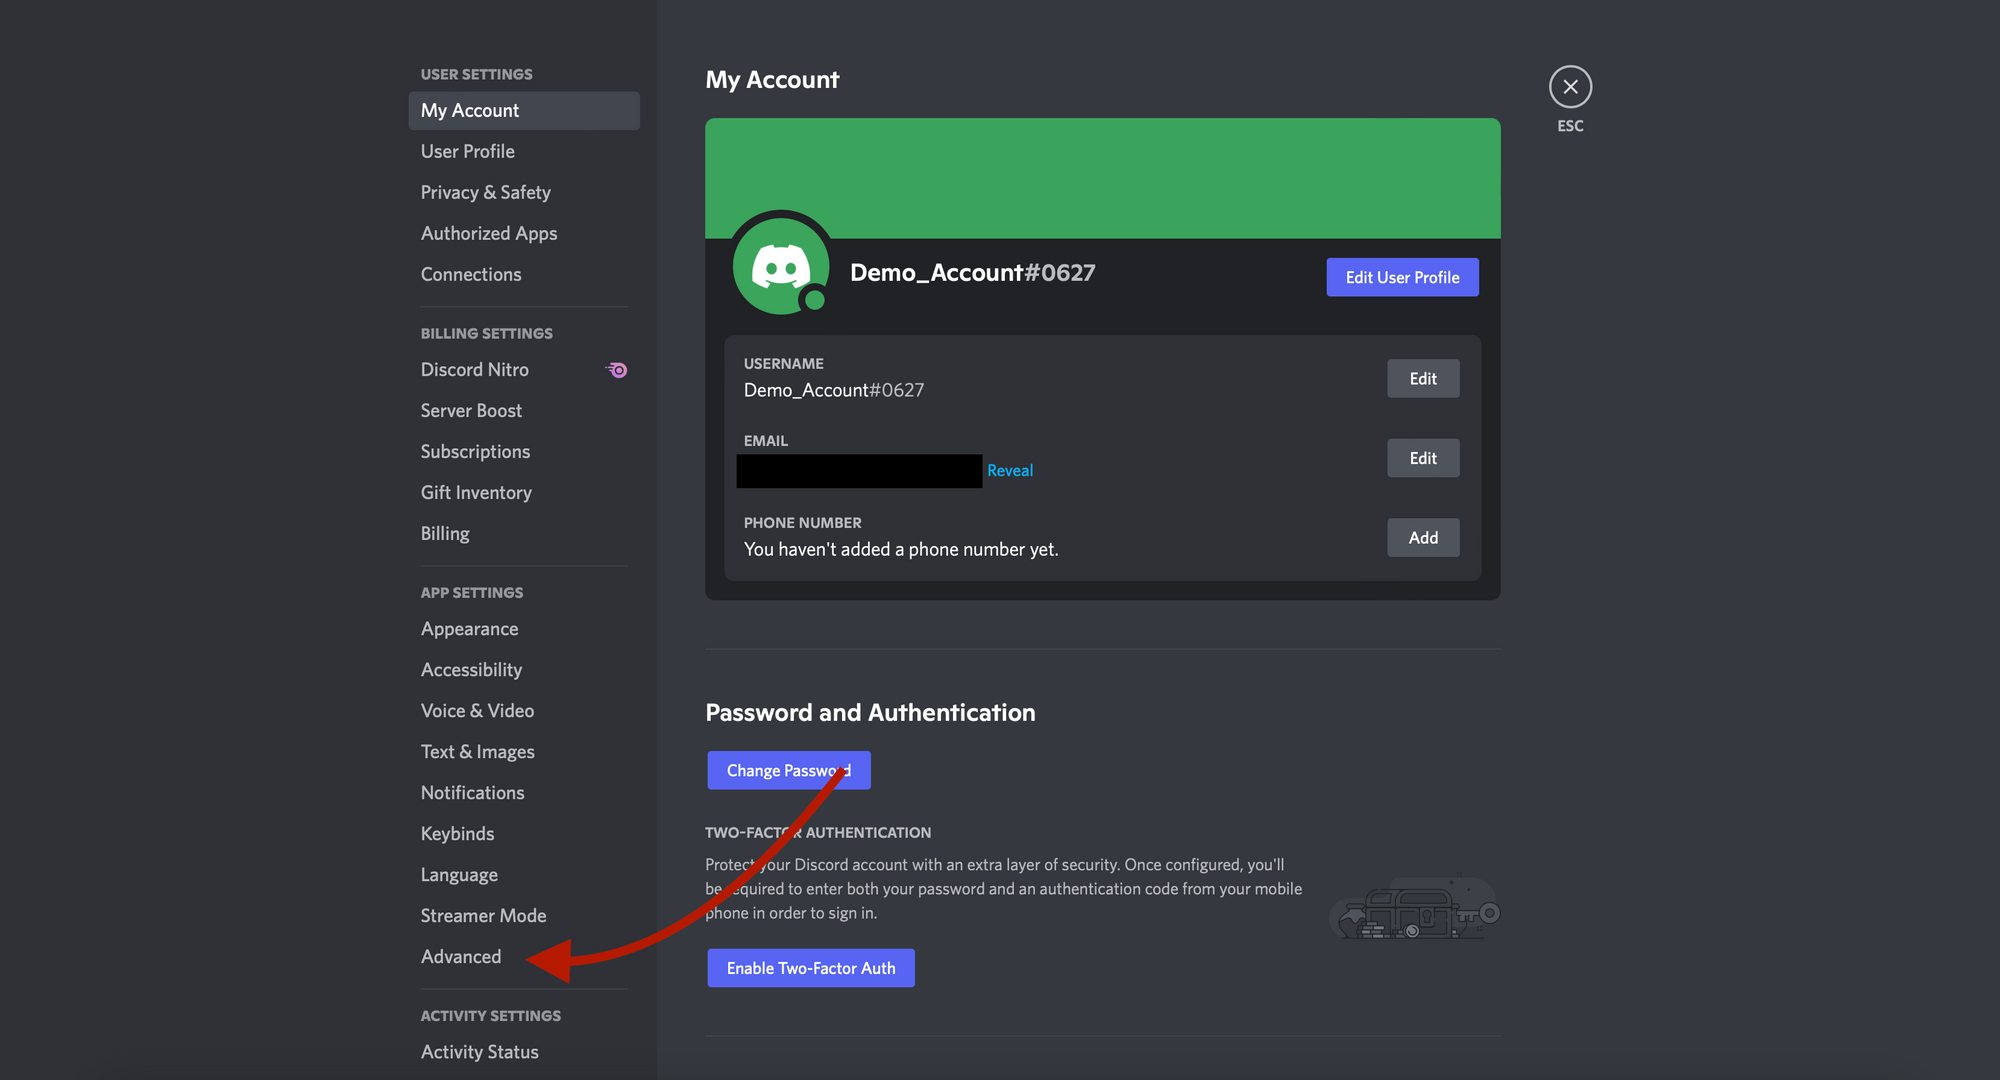 How to enable Developer Mode & Copy an ID